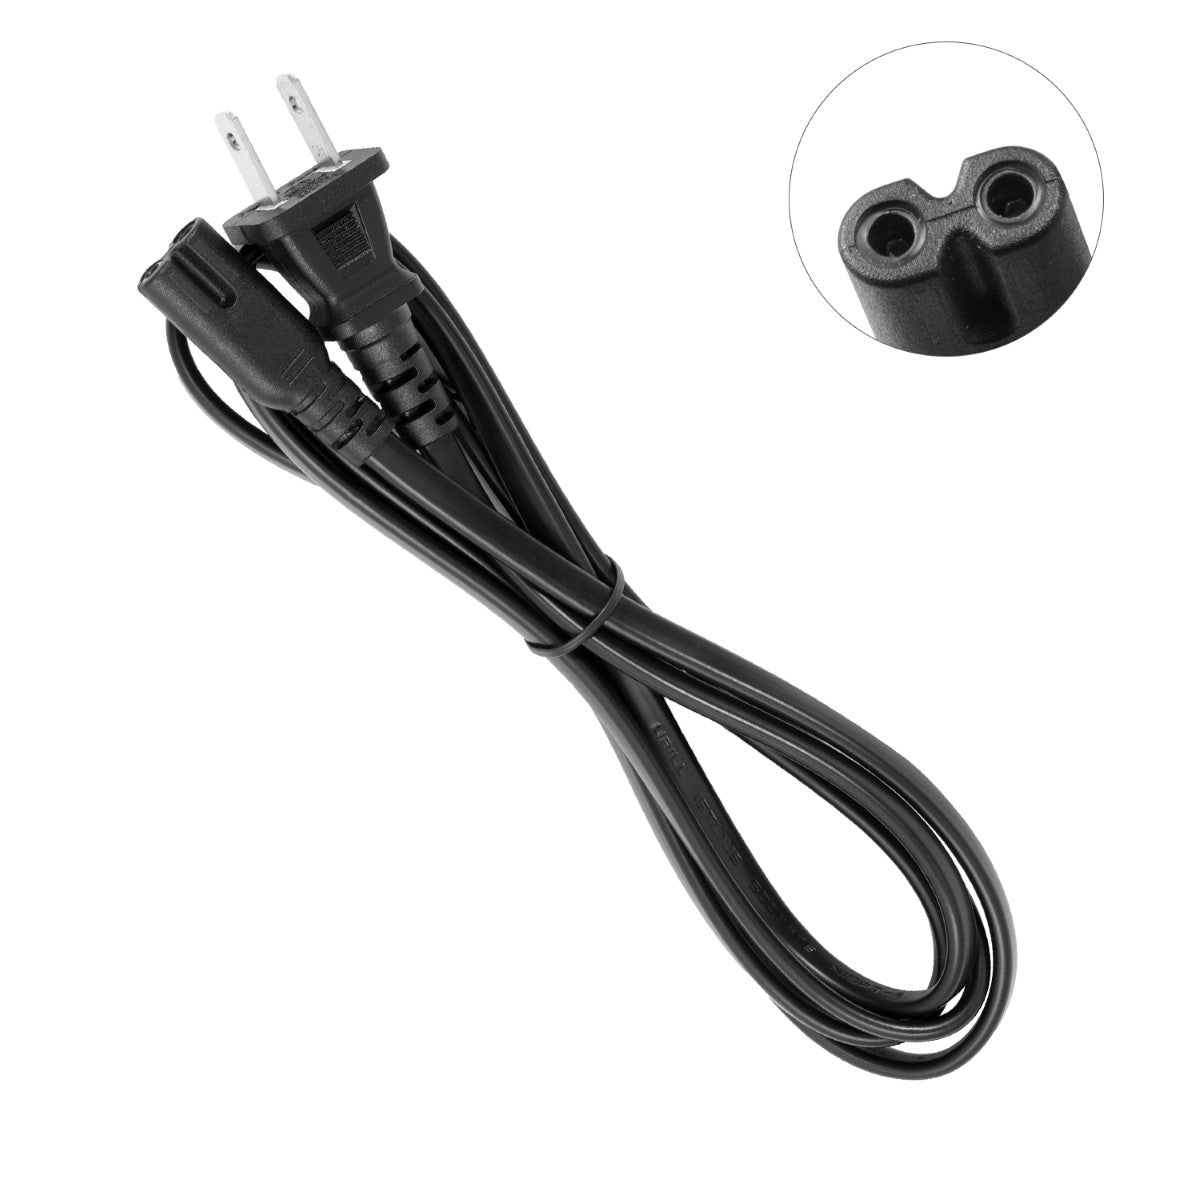 Power Cable  for HP ENVY Pro 6458 All-in-One Printer.